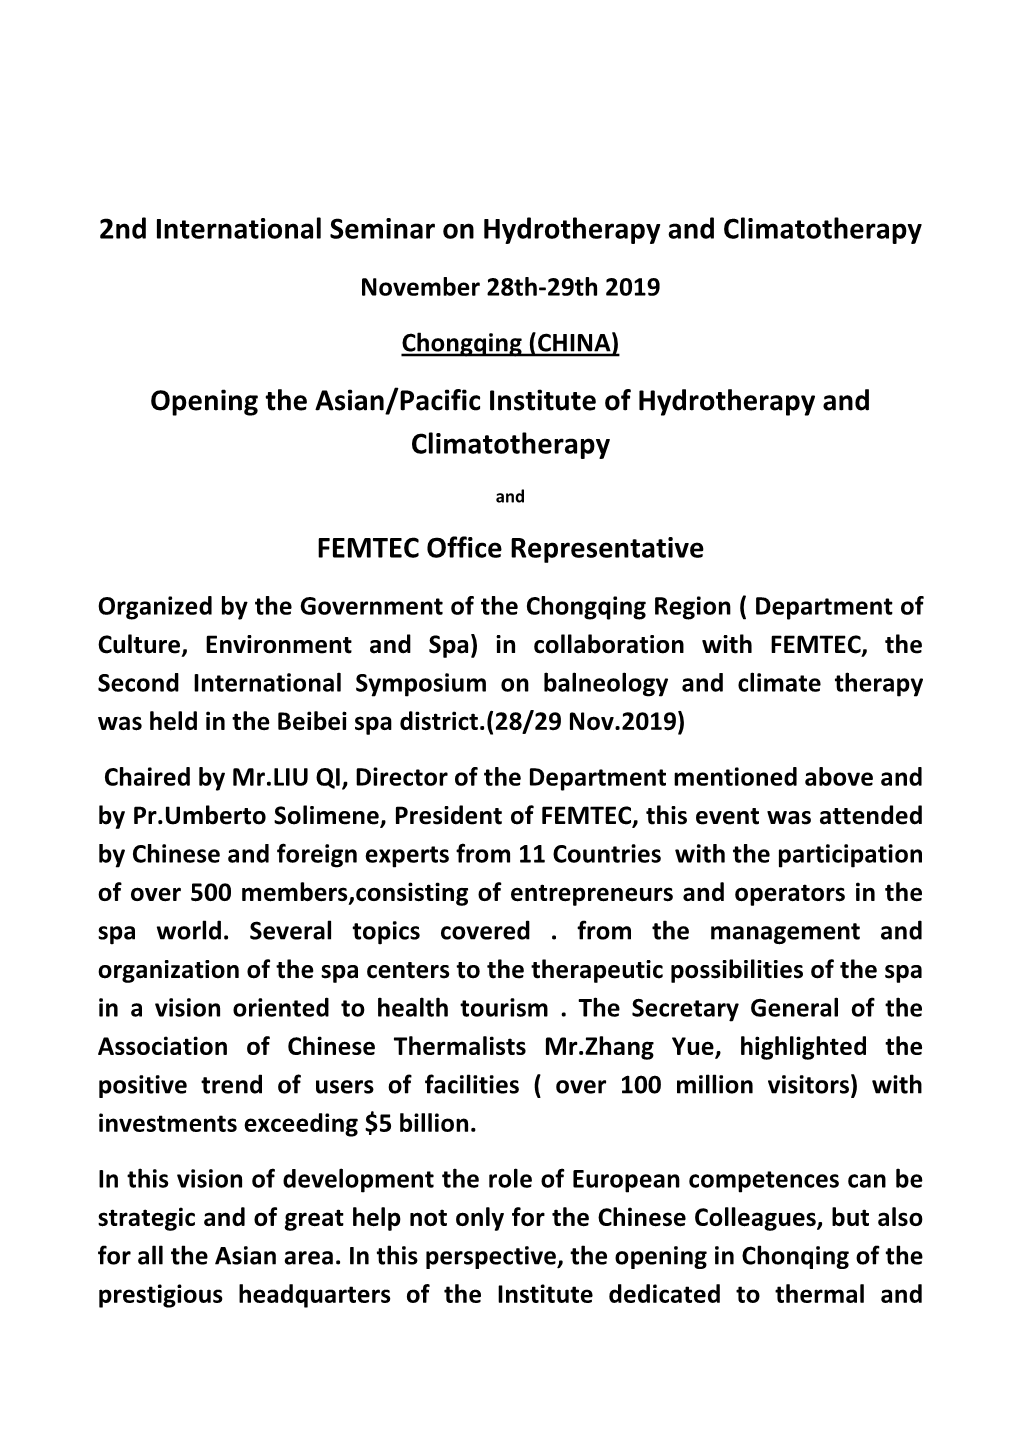 Opening the Asian/Pacific Institute of Hydrotherapy and Climatotherapy